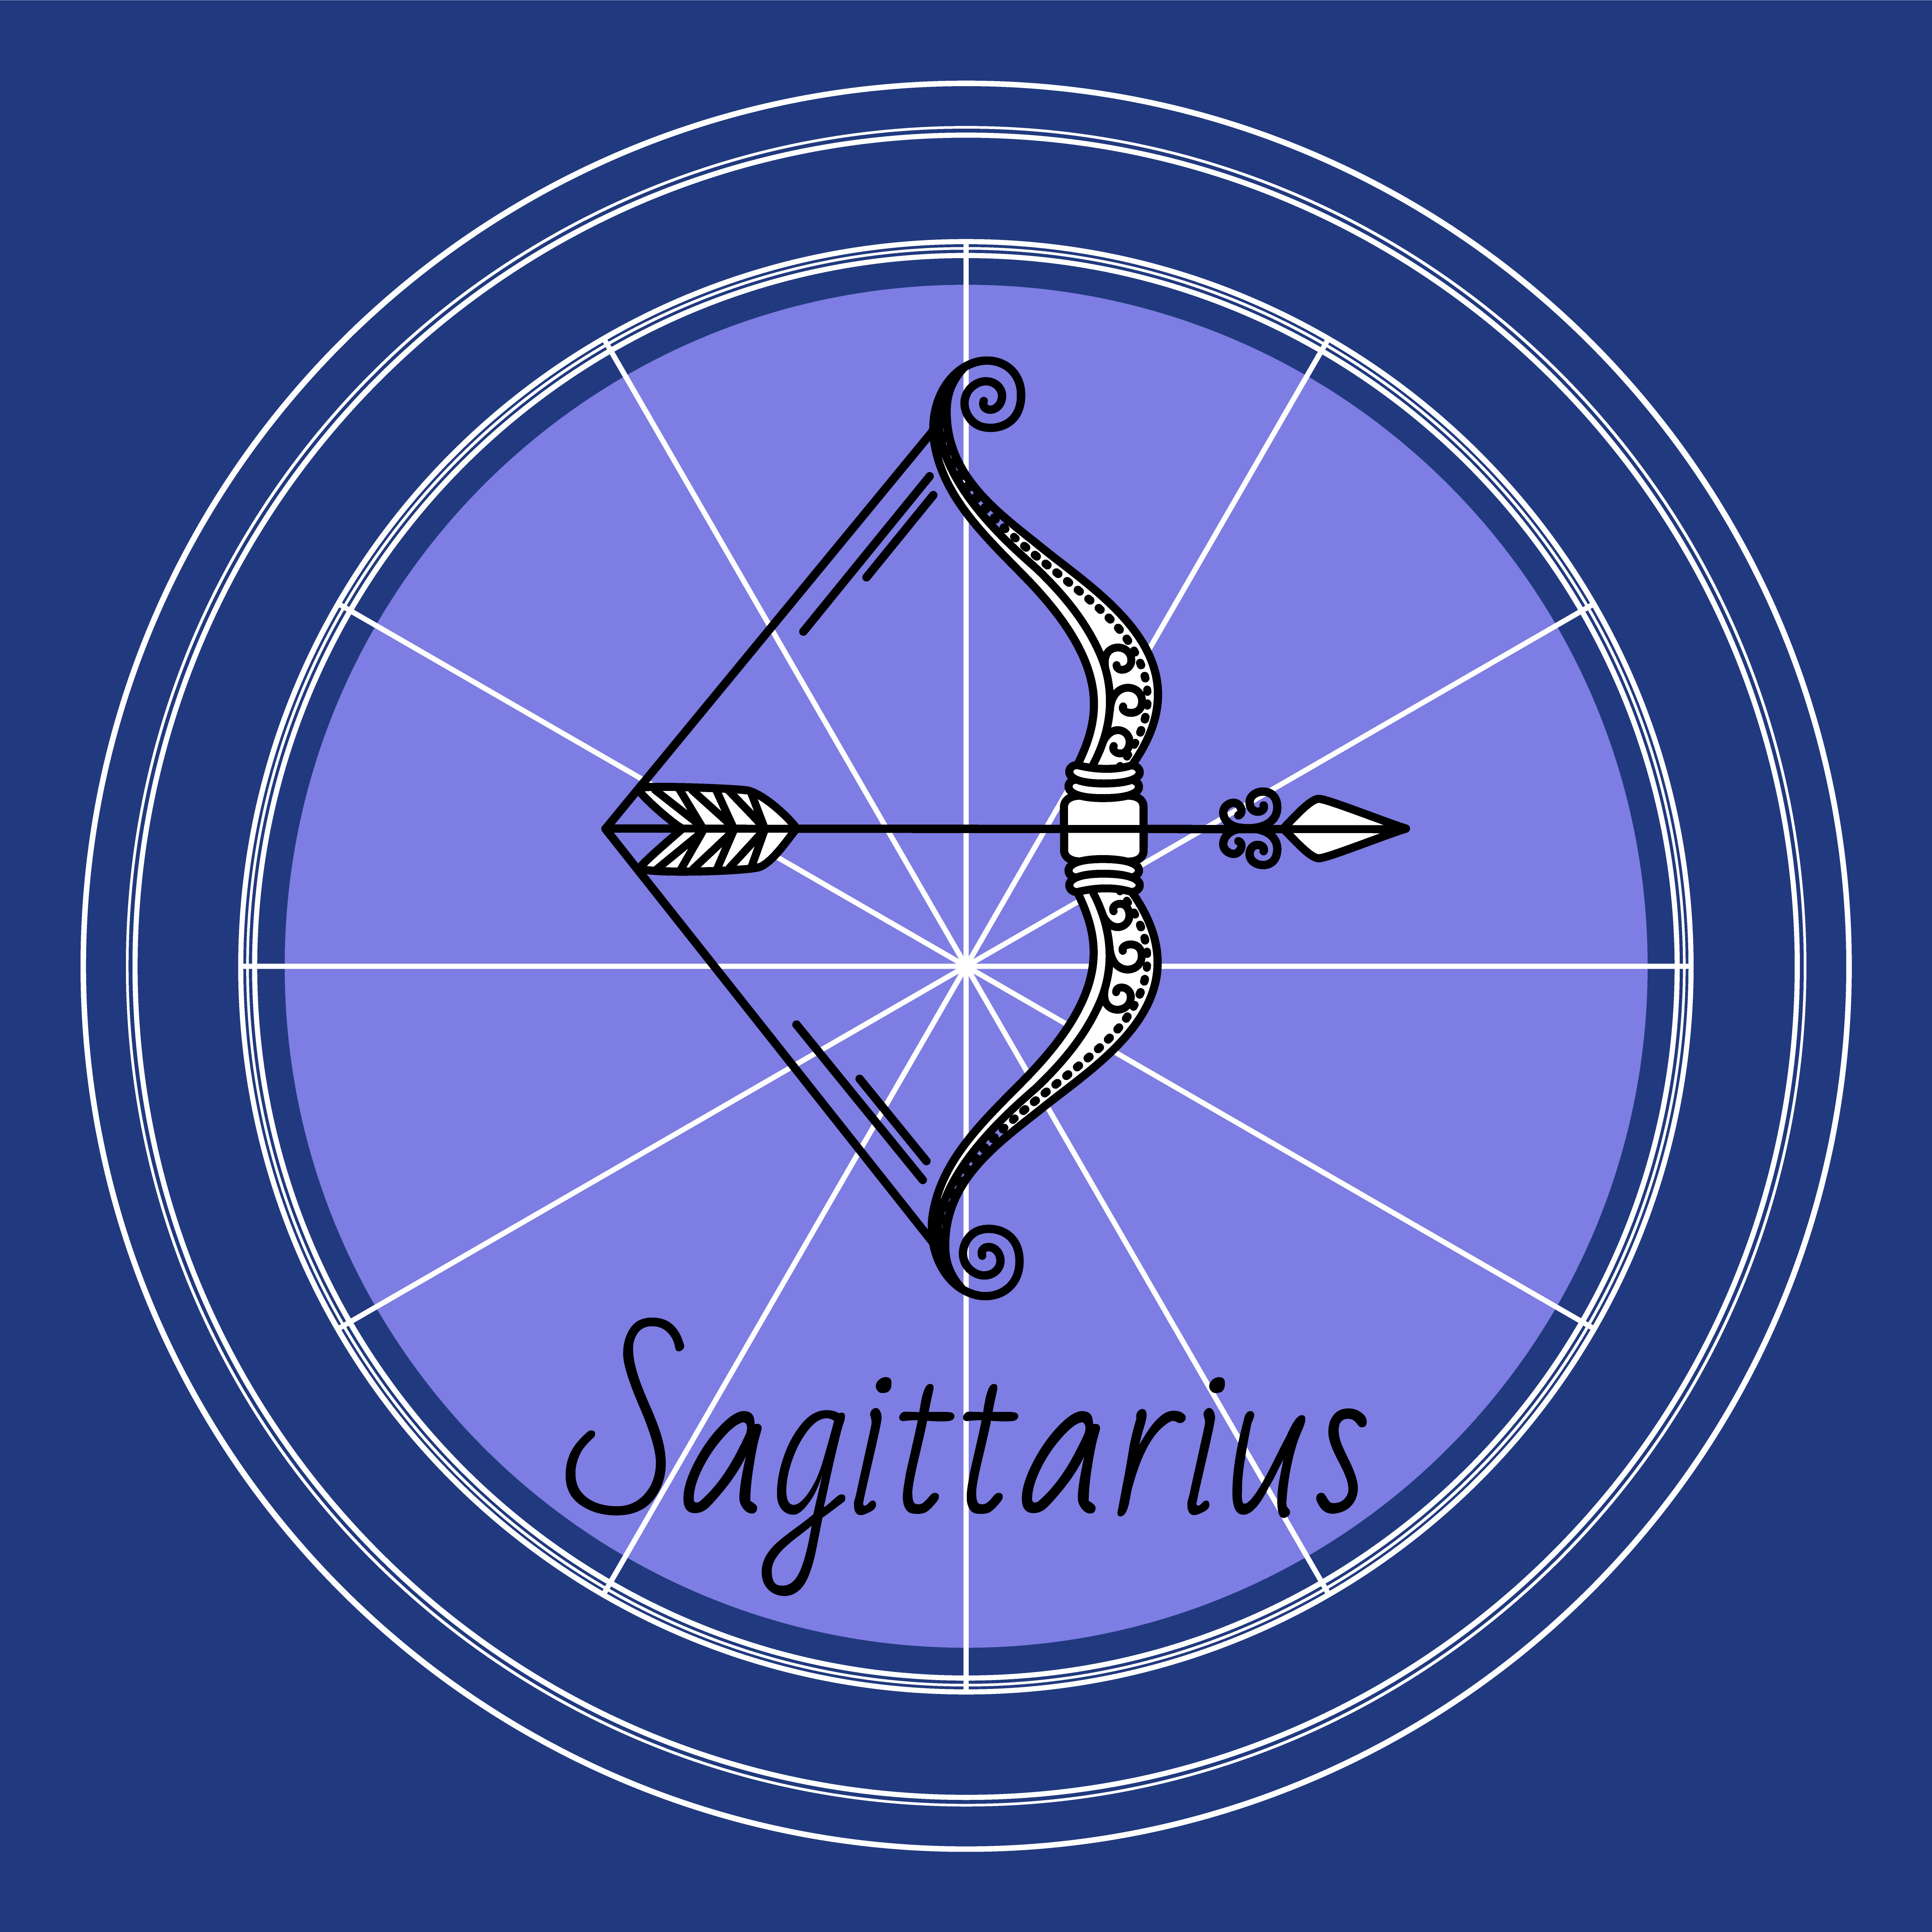 Sagittarius decorative design of mutable zodiac sign used for horoscopes and predictions. Isolated icon of ninth symbol of astrology. Element of archer with bow and arrow. Vector in flat style. Sagittarius Zodiac Sign of Horoscope, Astrology